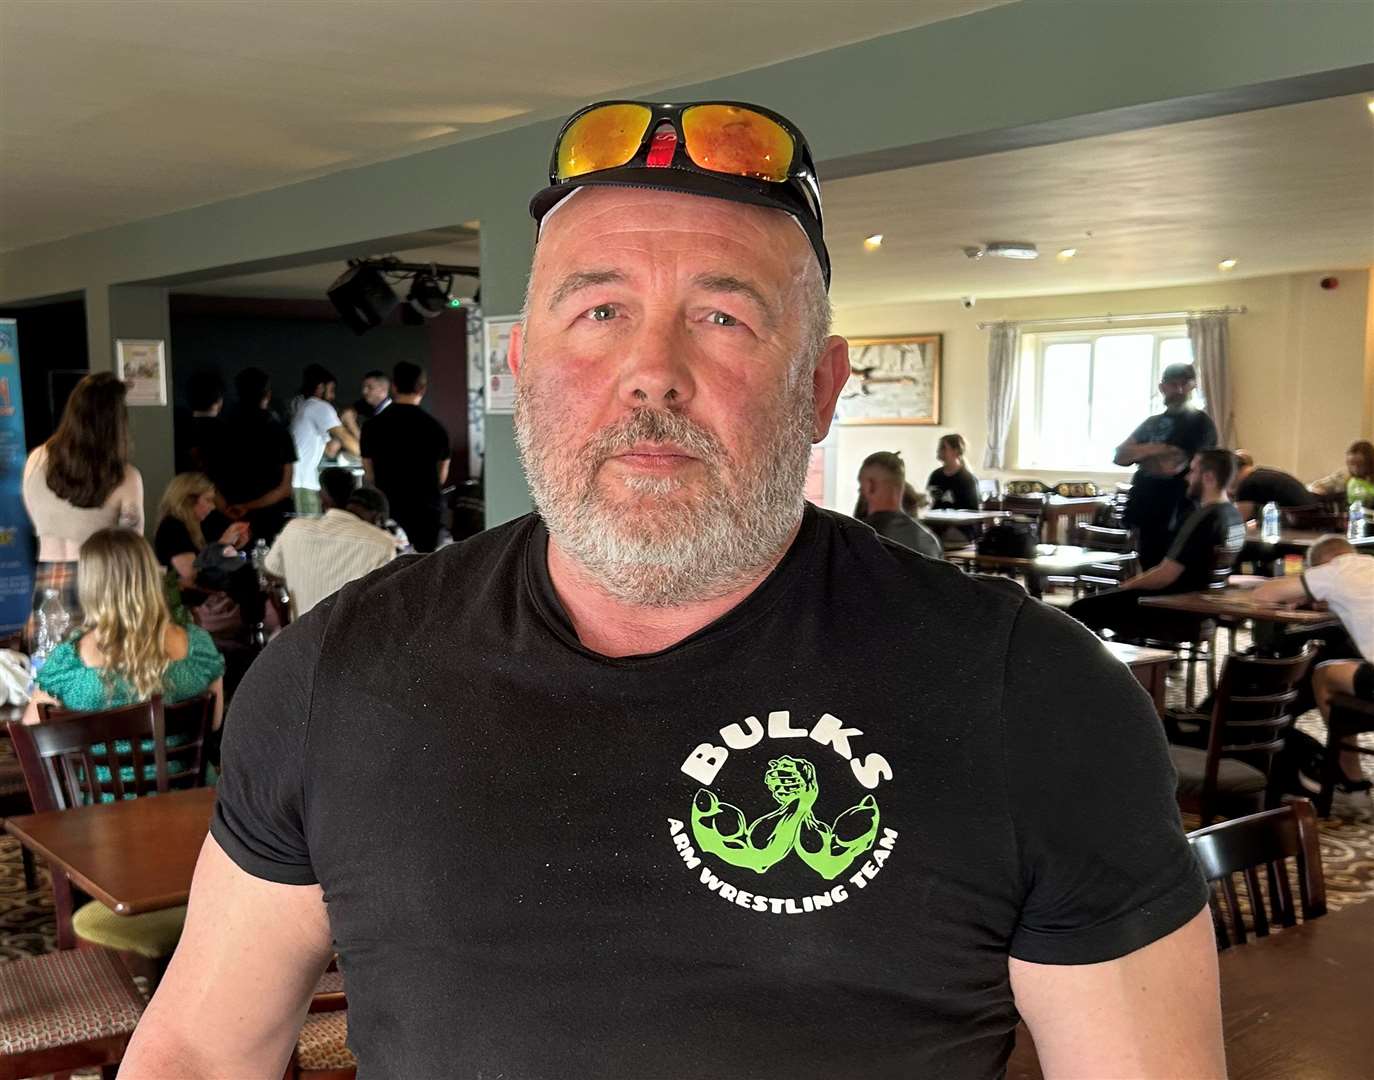 Michael Britchfield, 59, co-founded the Bulks Gym Arm Wrestling Club in Gravesend